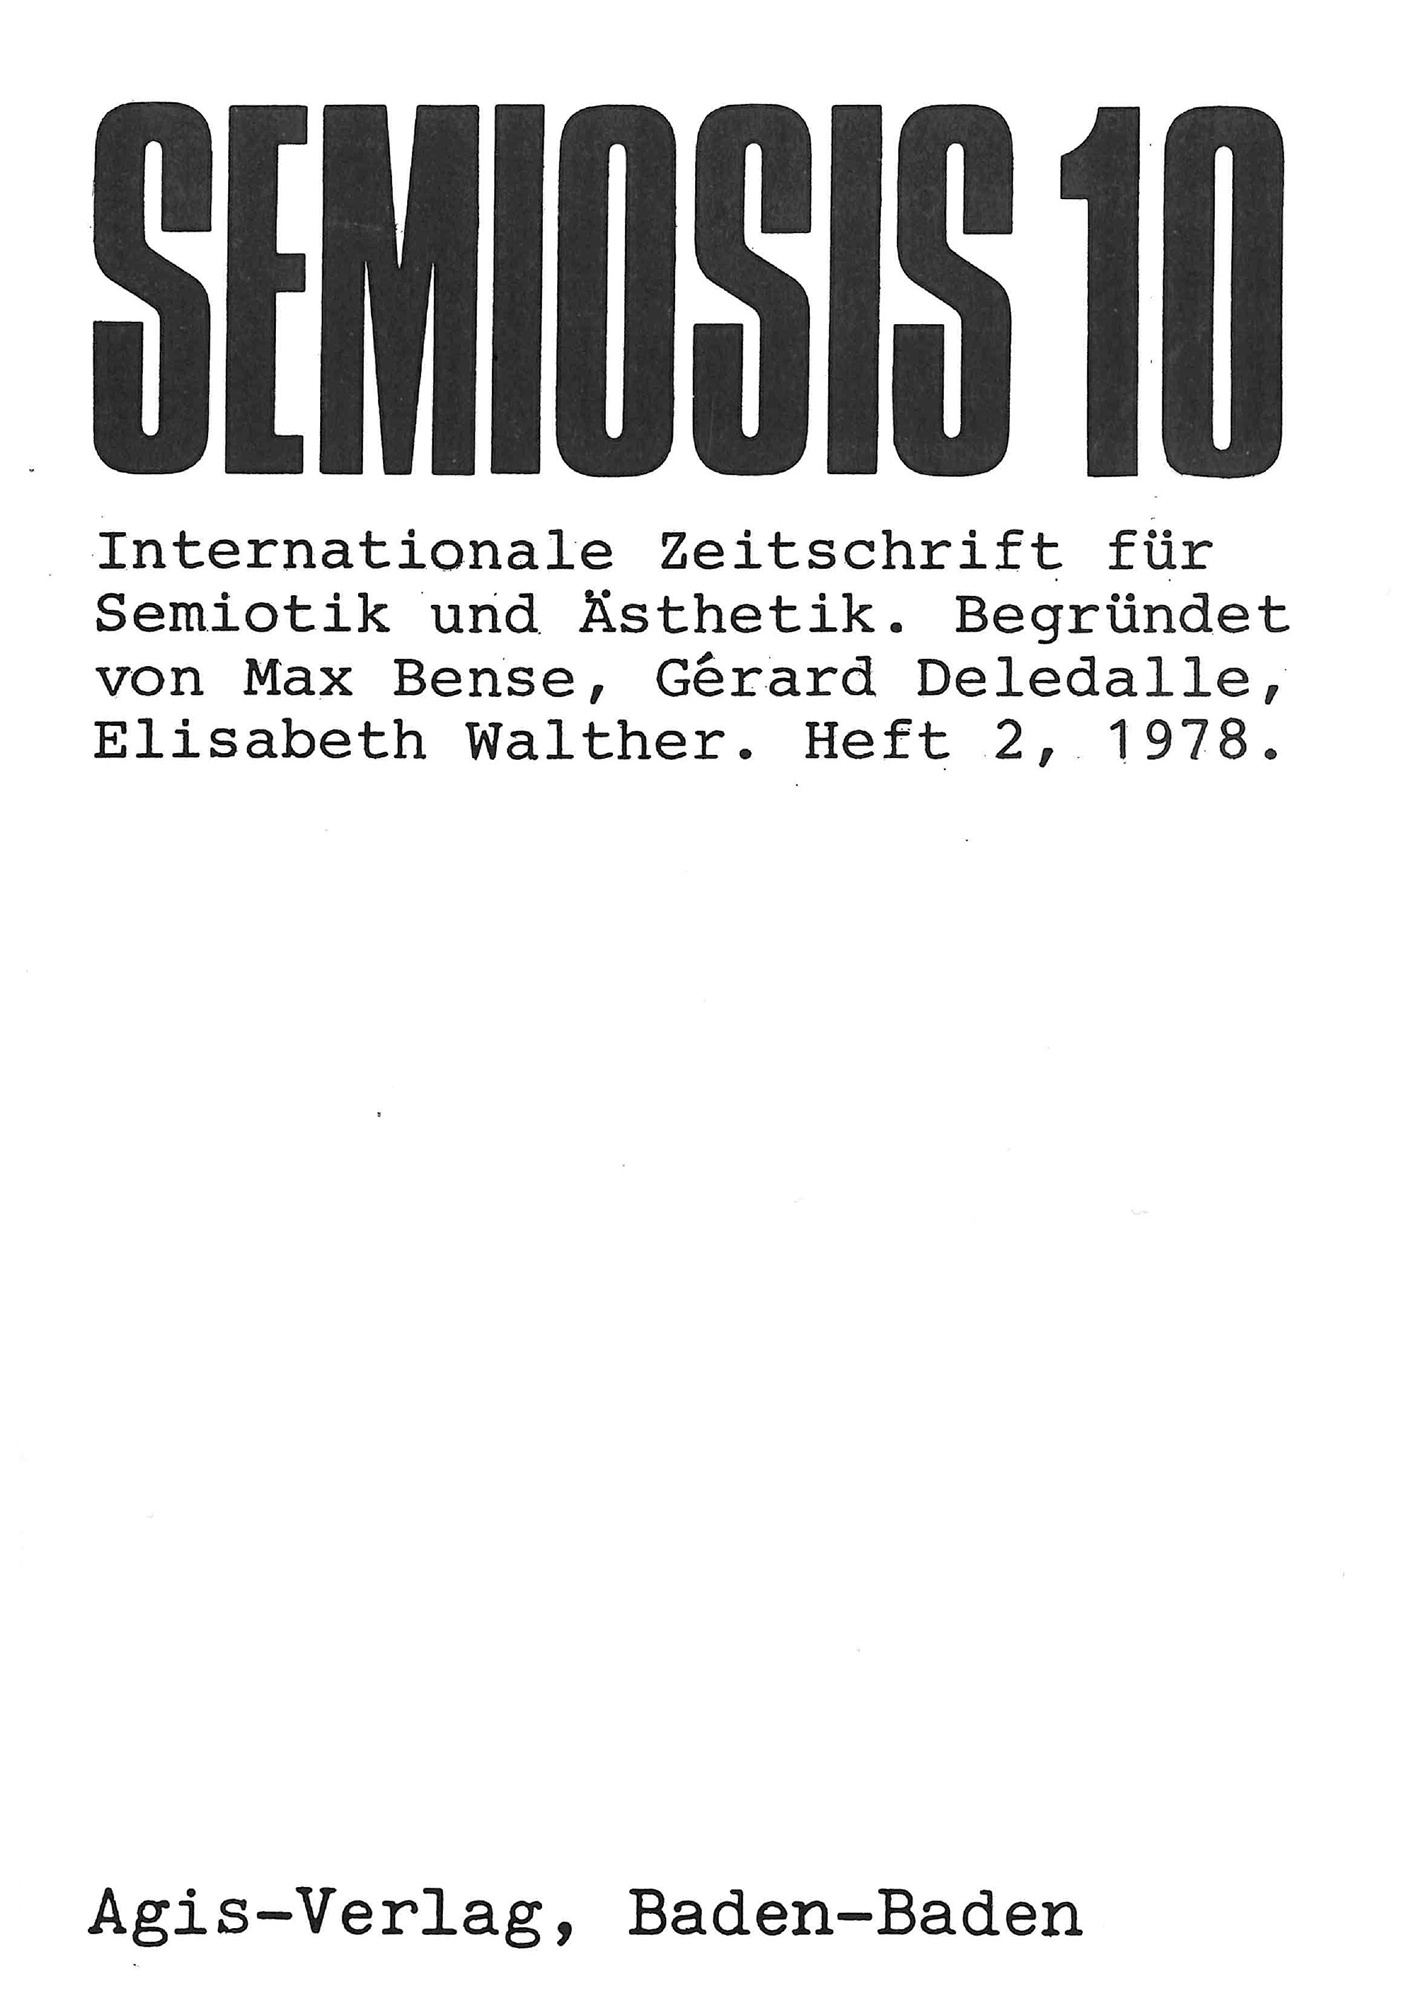 Cover of the magazine "semiosis": black text on white background